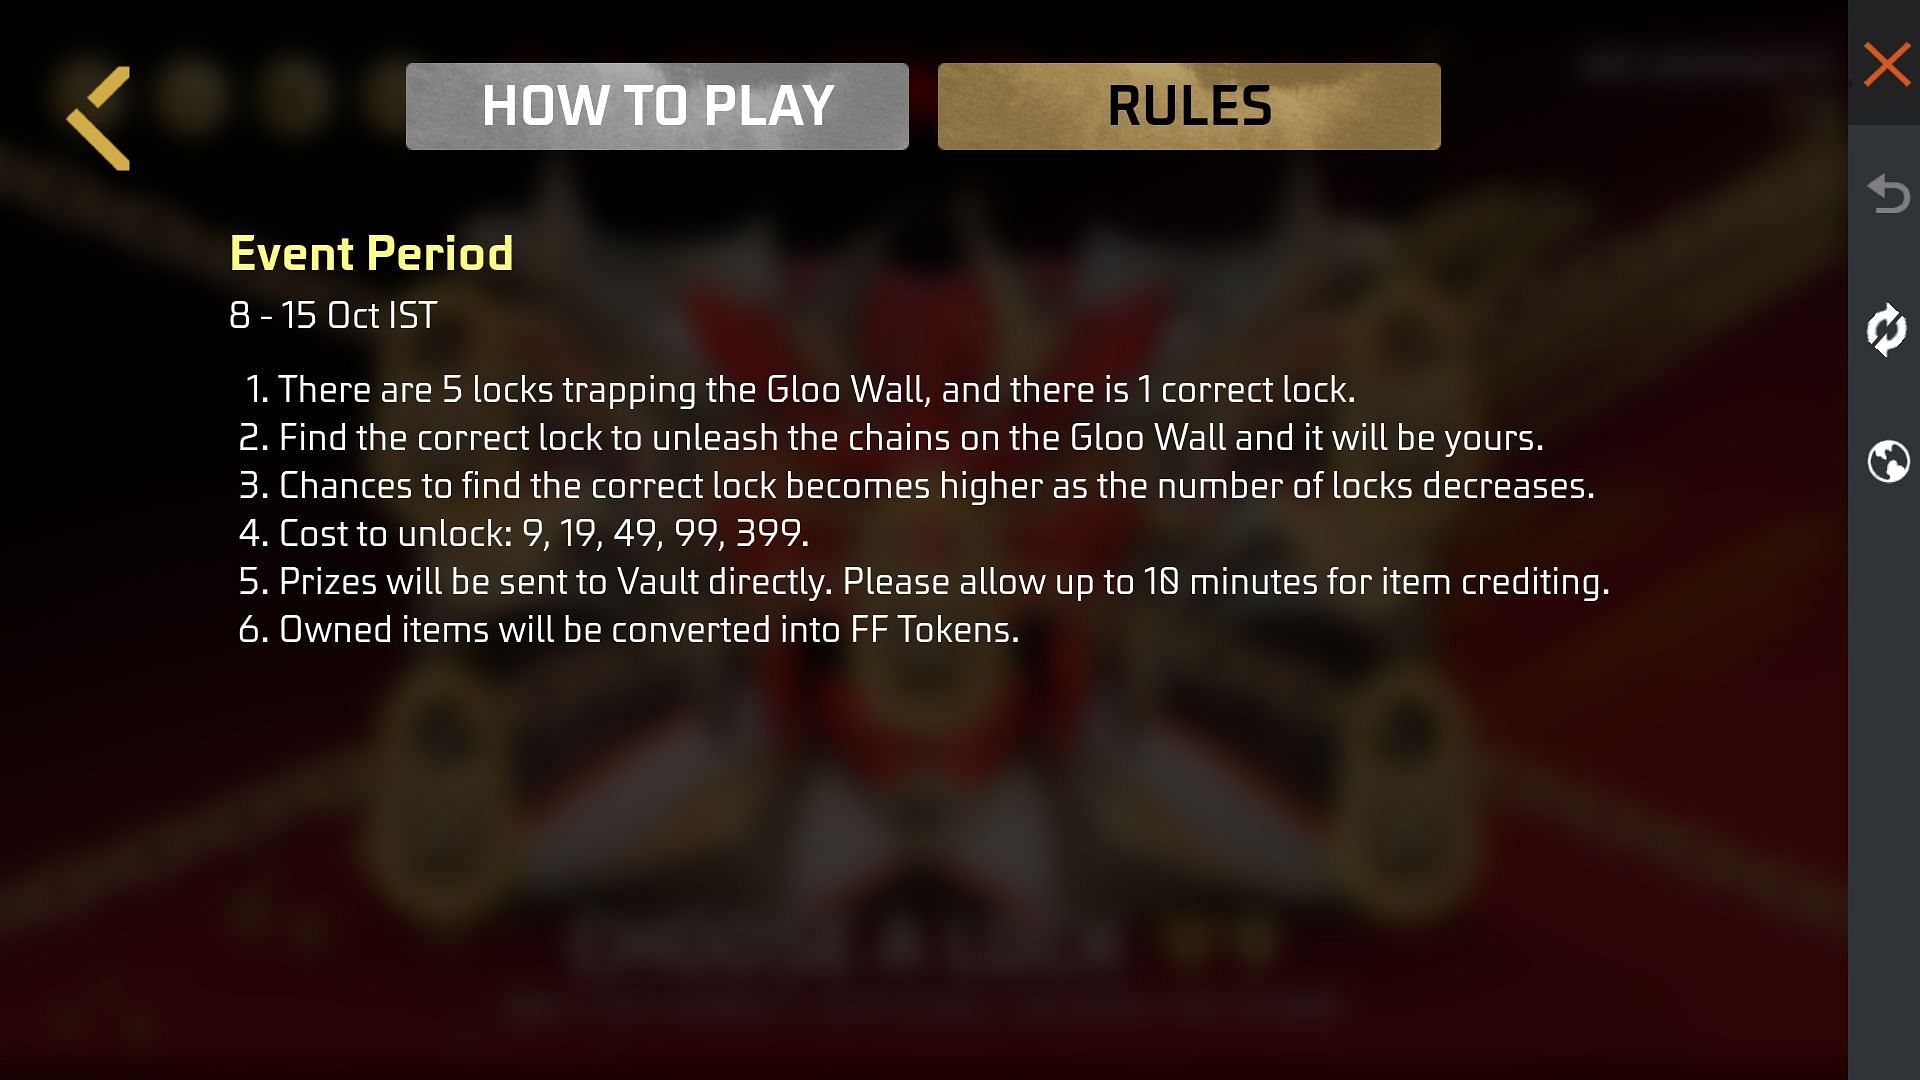 These are the rules of the event (Image via Garena)